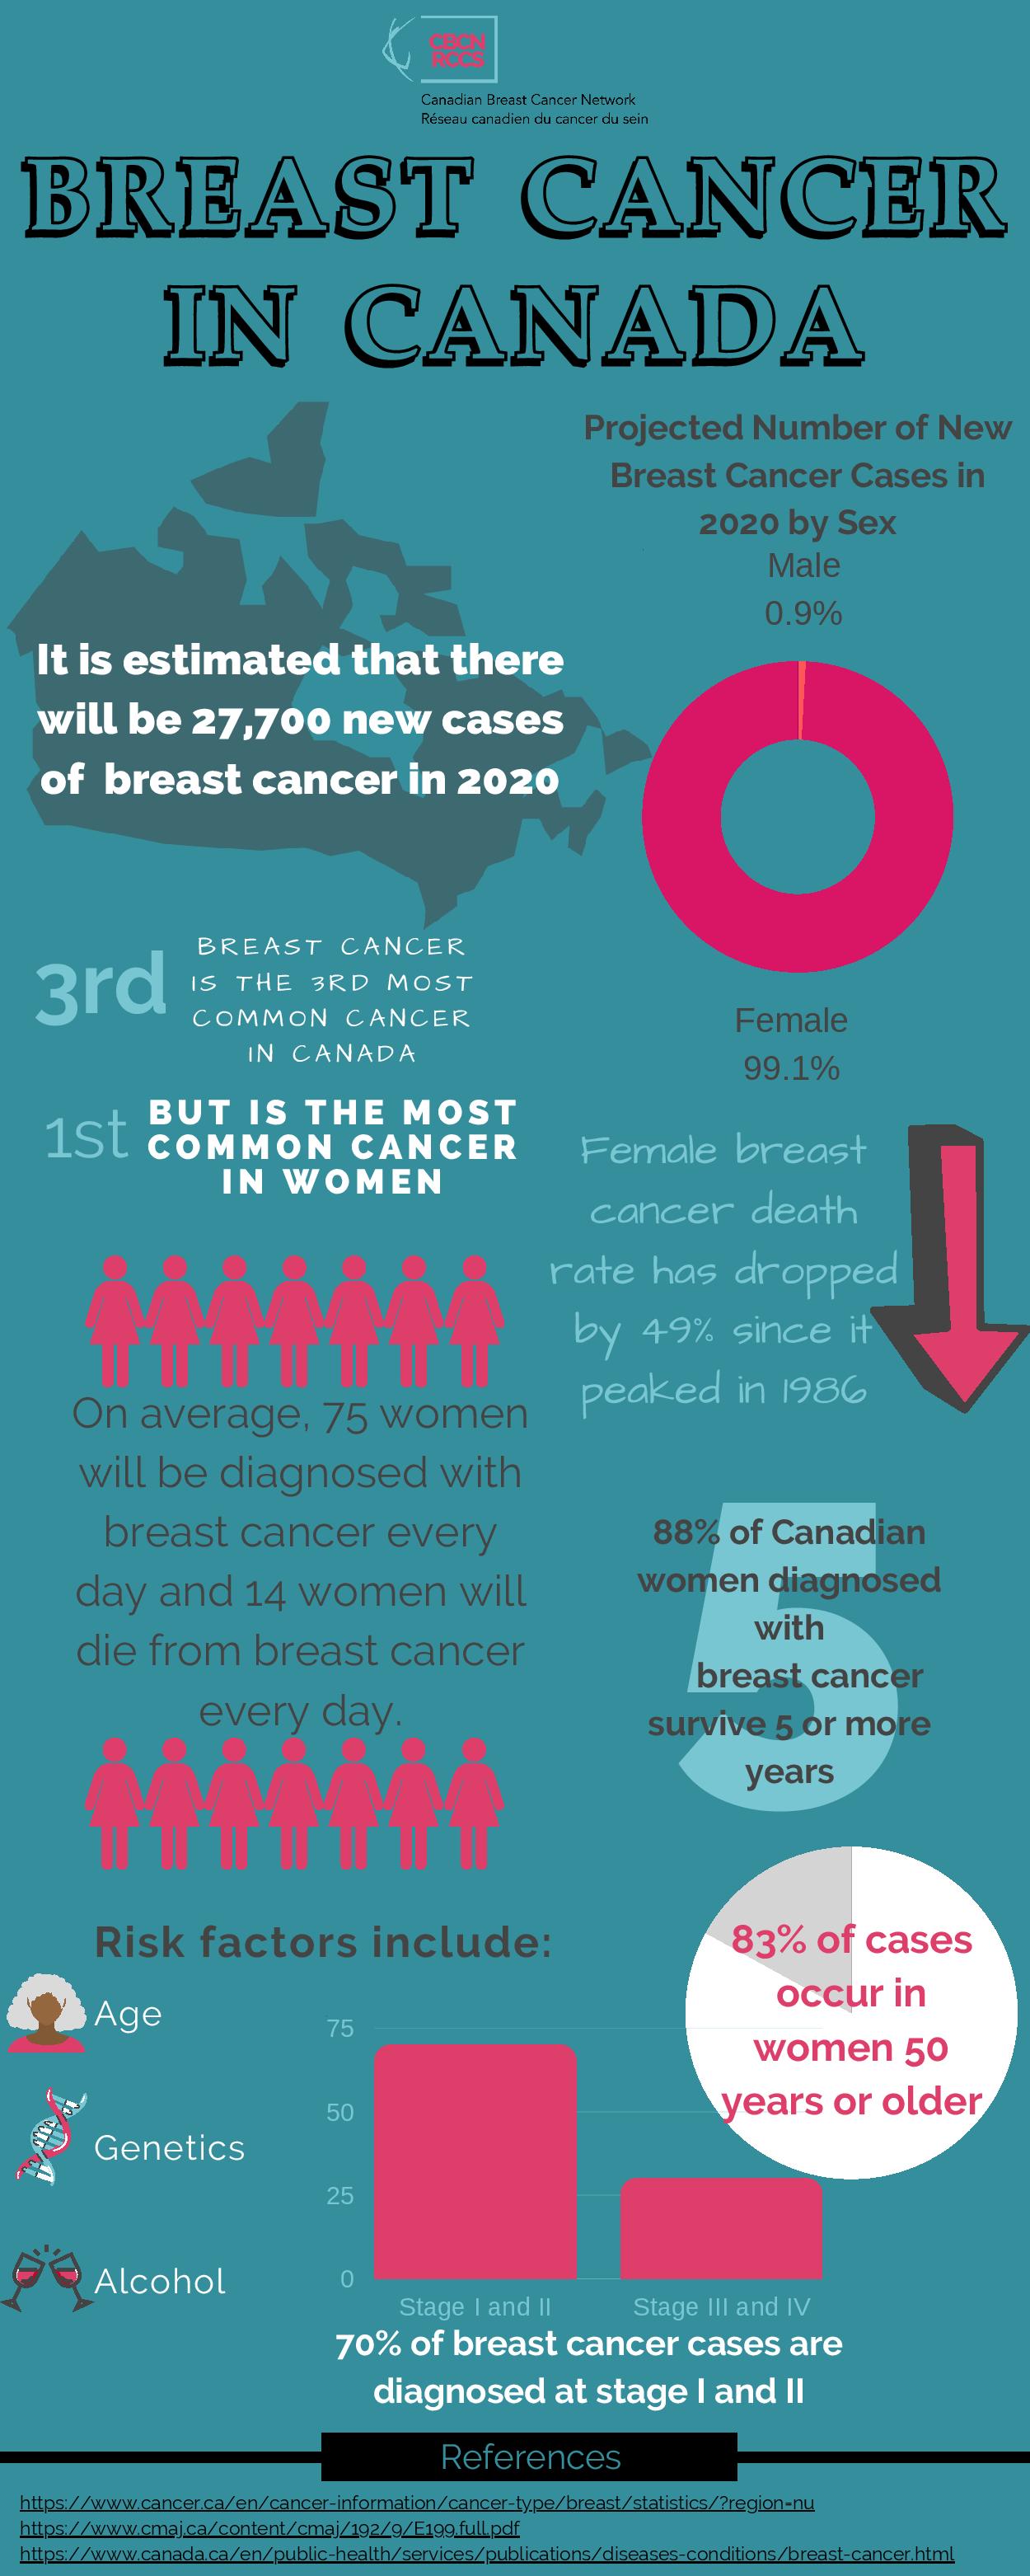 Canadian Breast Cancer Network 